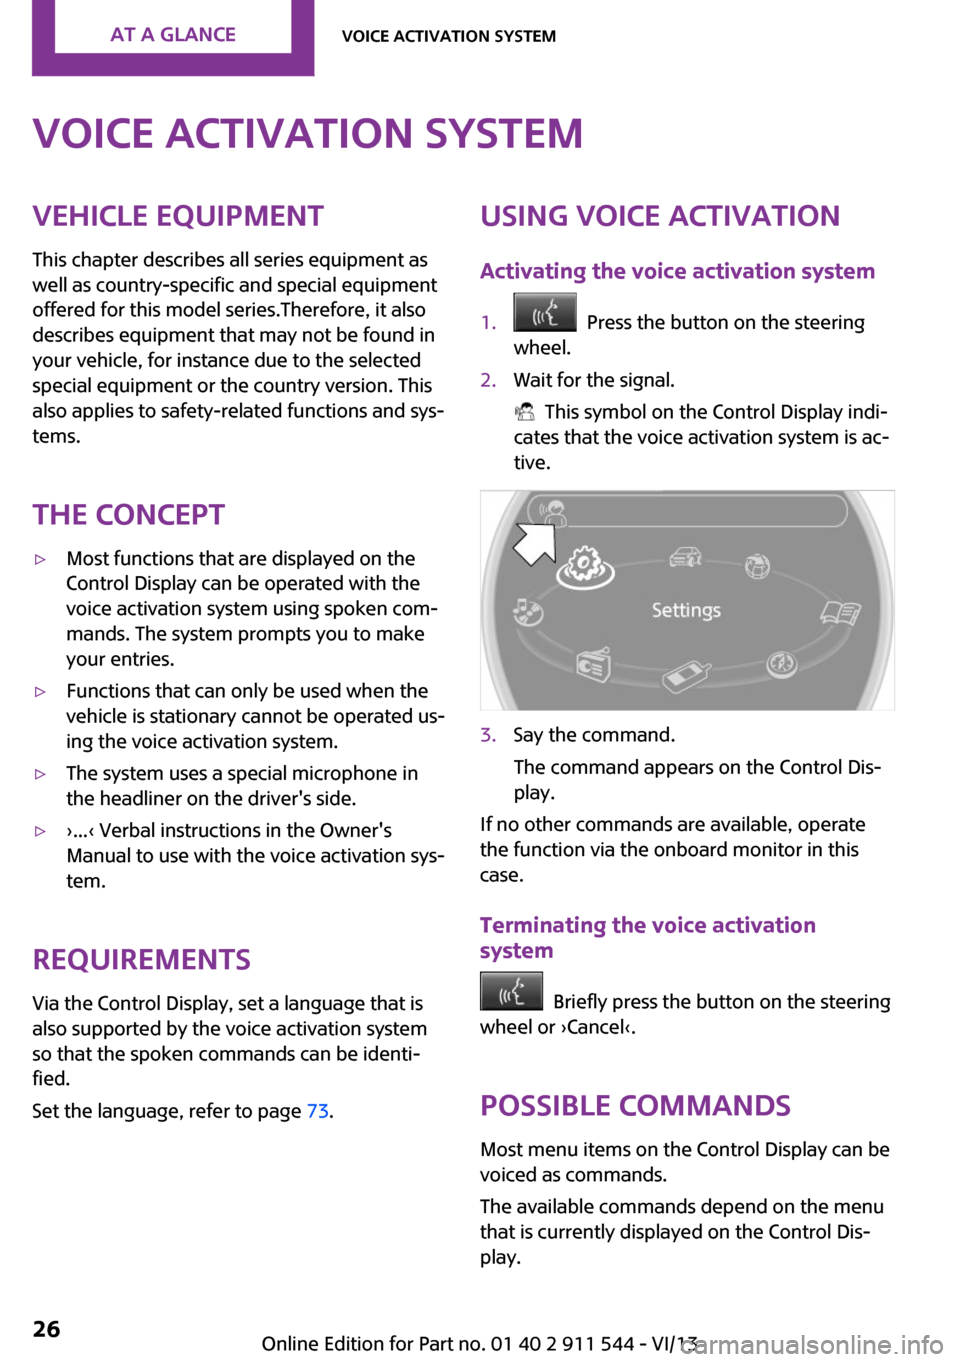 MINI Paceman 2014  Owners Manual (Mini Connected) Voice activation systemVehicle equipment
This chapter describes all series equipment as
well as country-specific and special equipment
offered for this model series.Therefore, it also
describes equipm